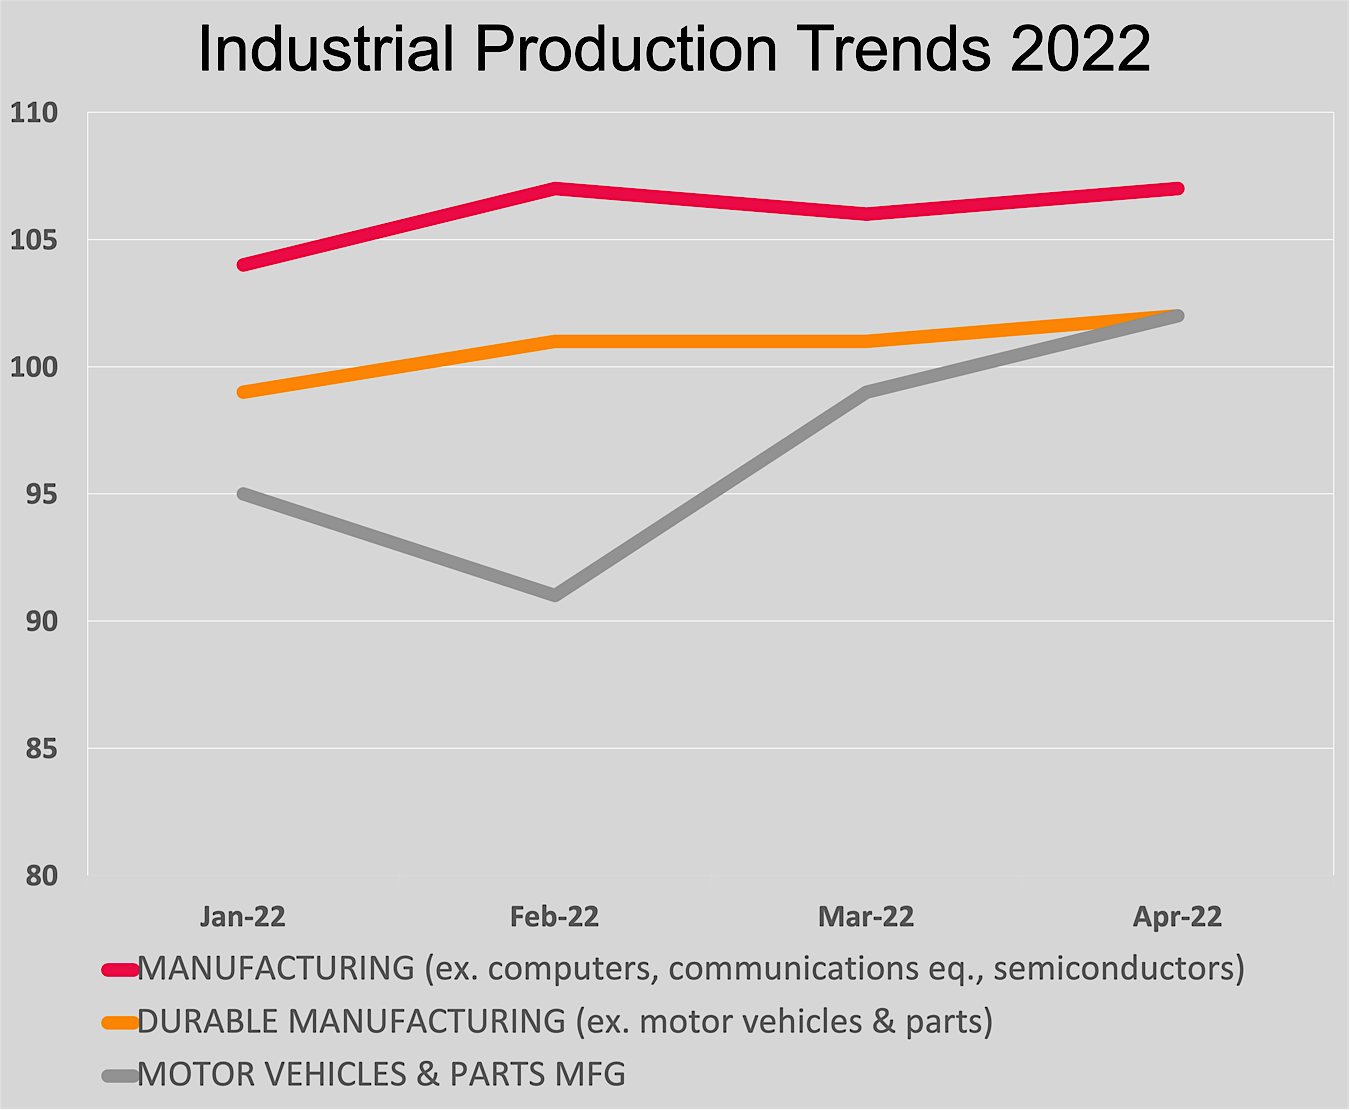 U.S. Manufacturing Growth Indicators include the Industrial Production data from the Federal Reserve shown in this chart. Data is described in the article.